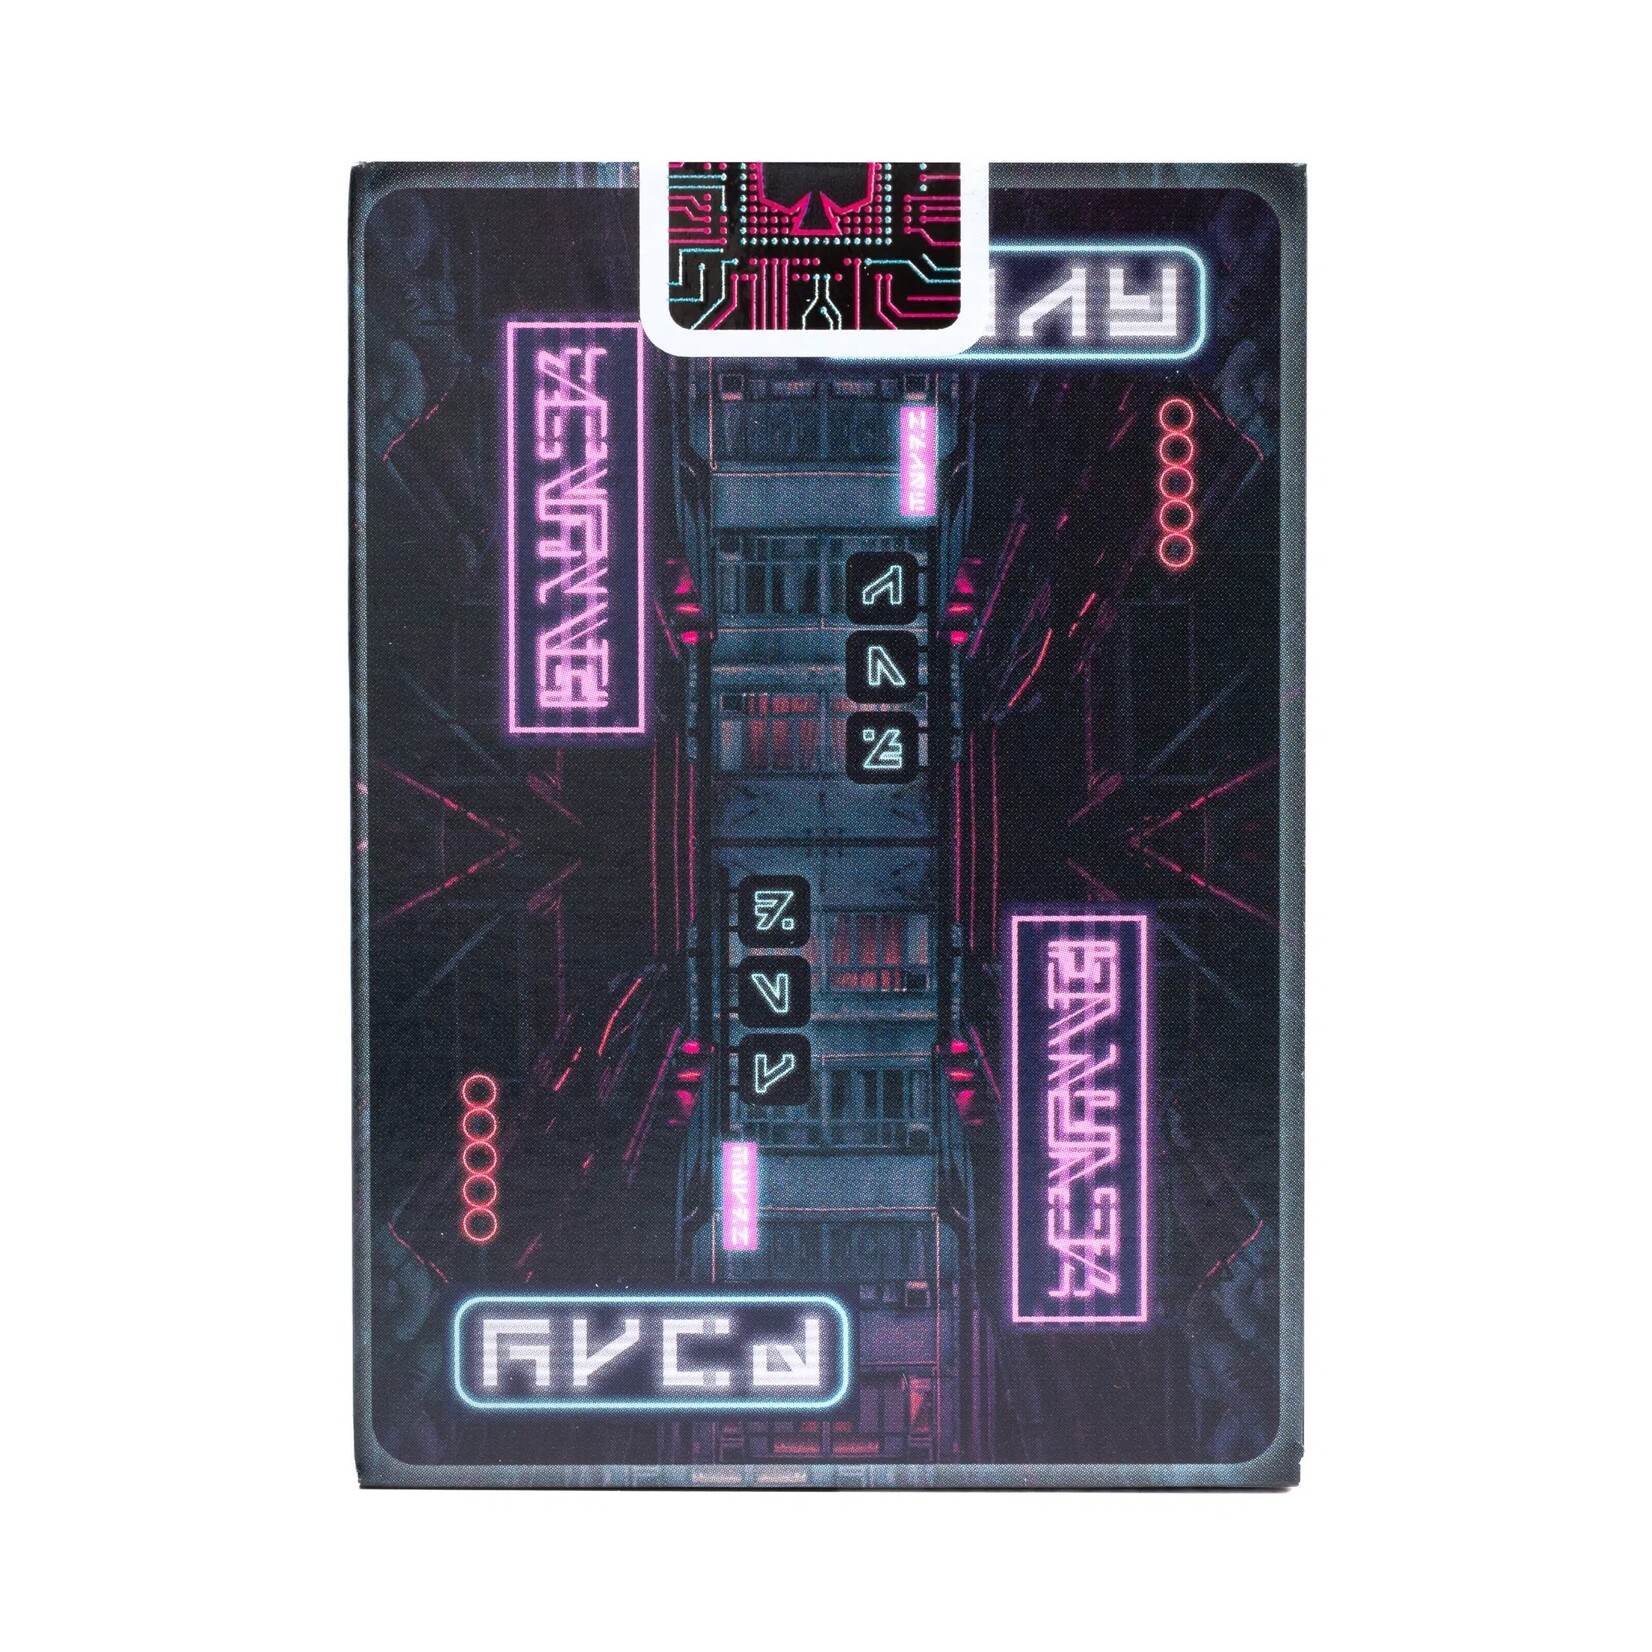 Bicycle Playing Cards: Cyberpunk